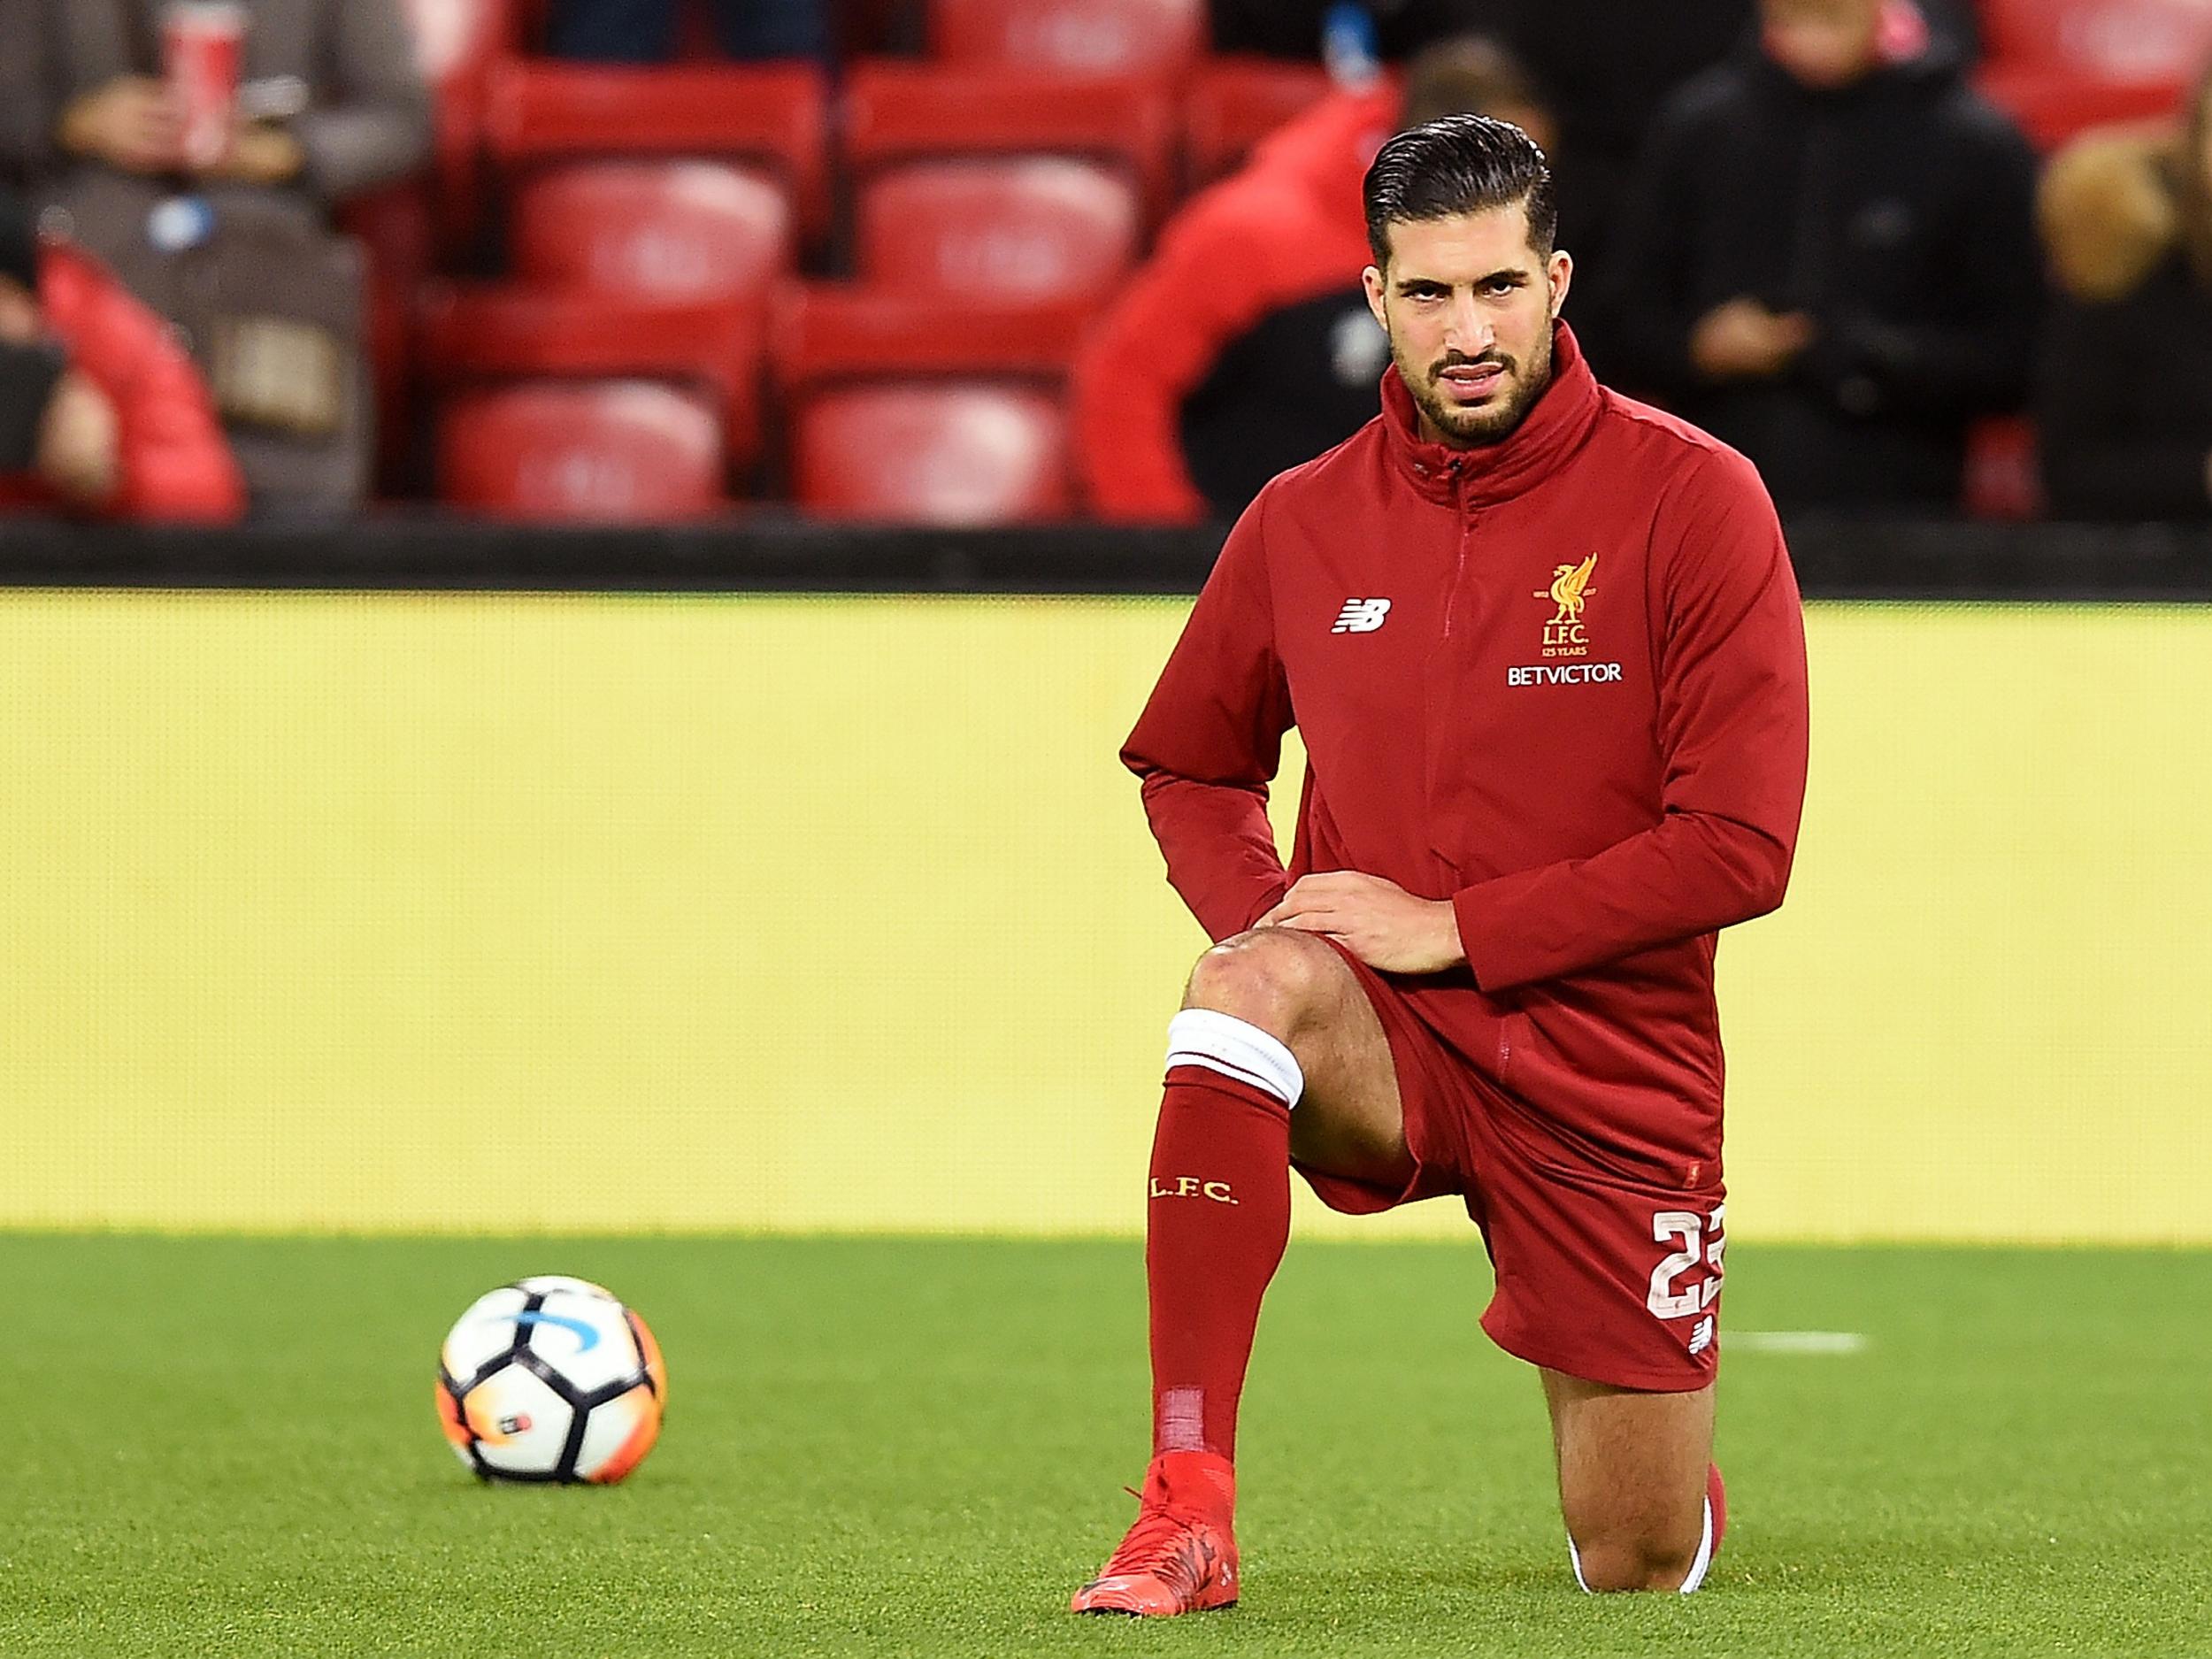 Liverpool midfielder Emre Can is yet to agree a new contract at Anfield